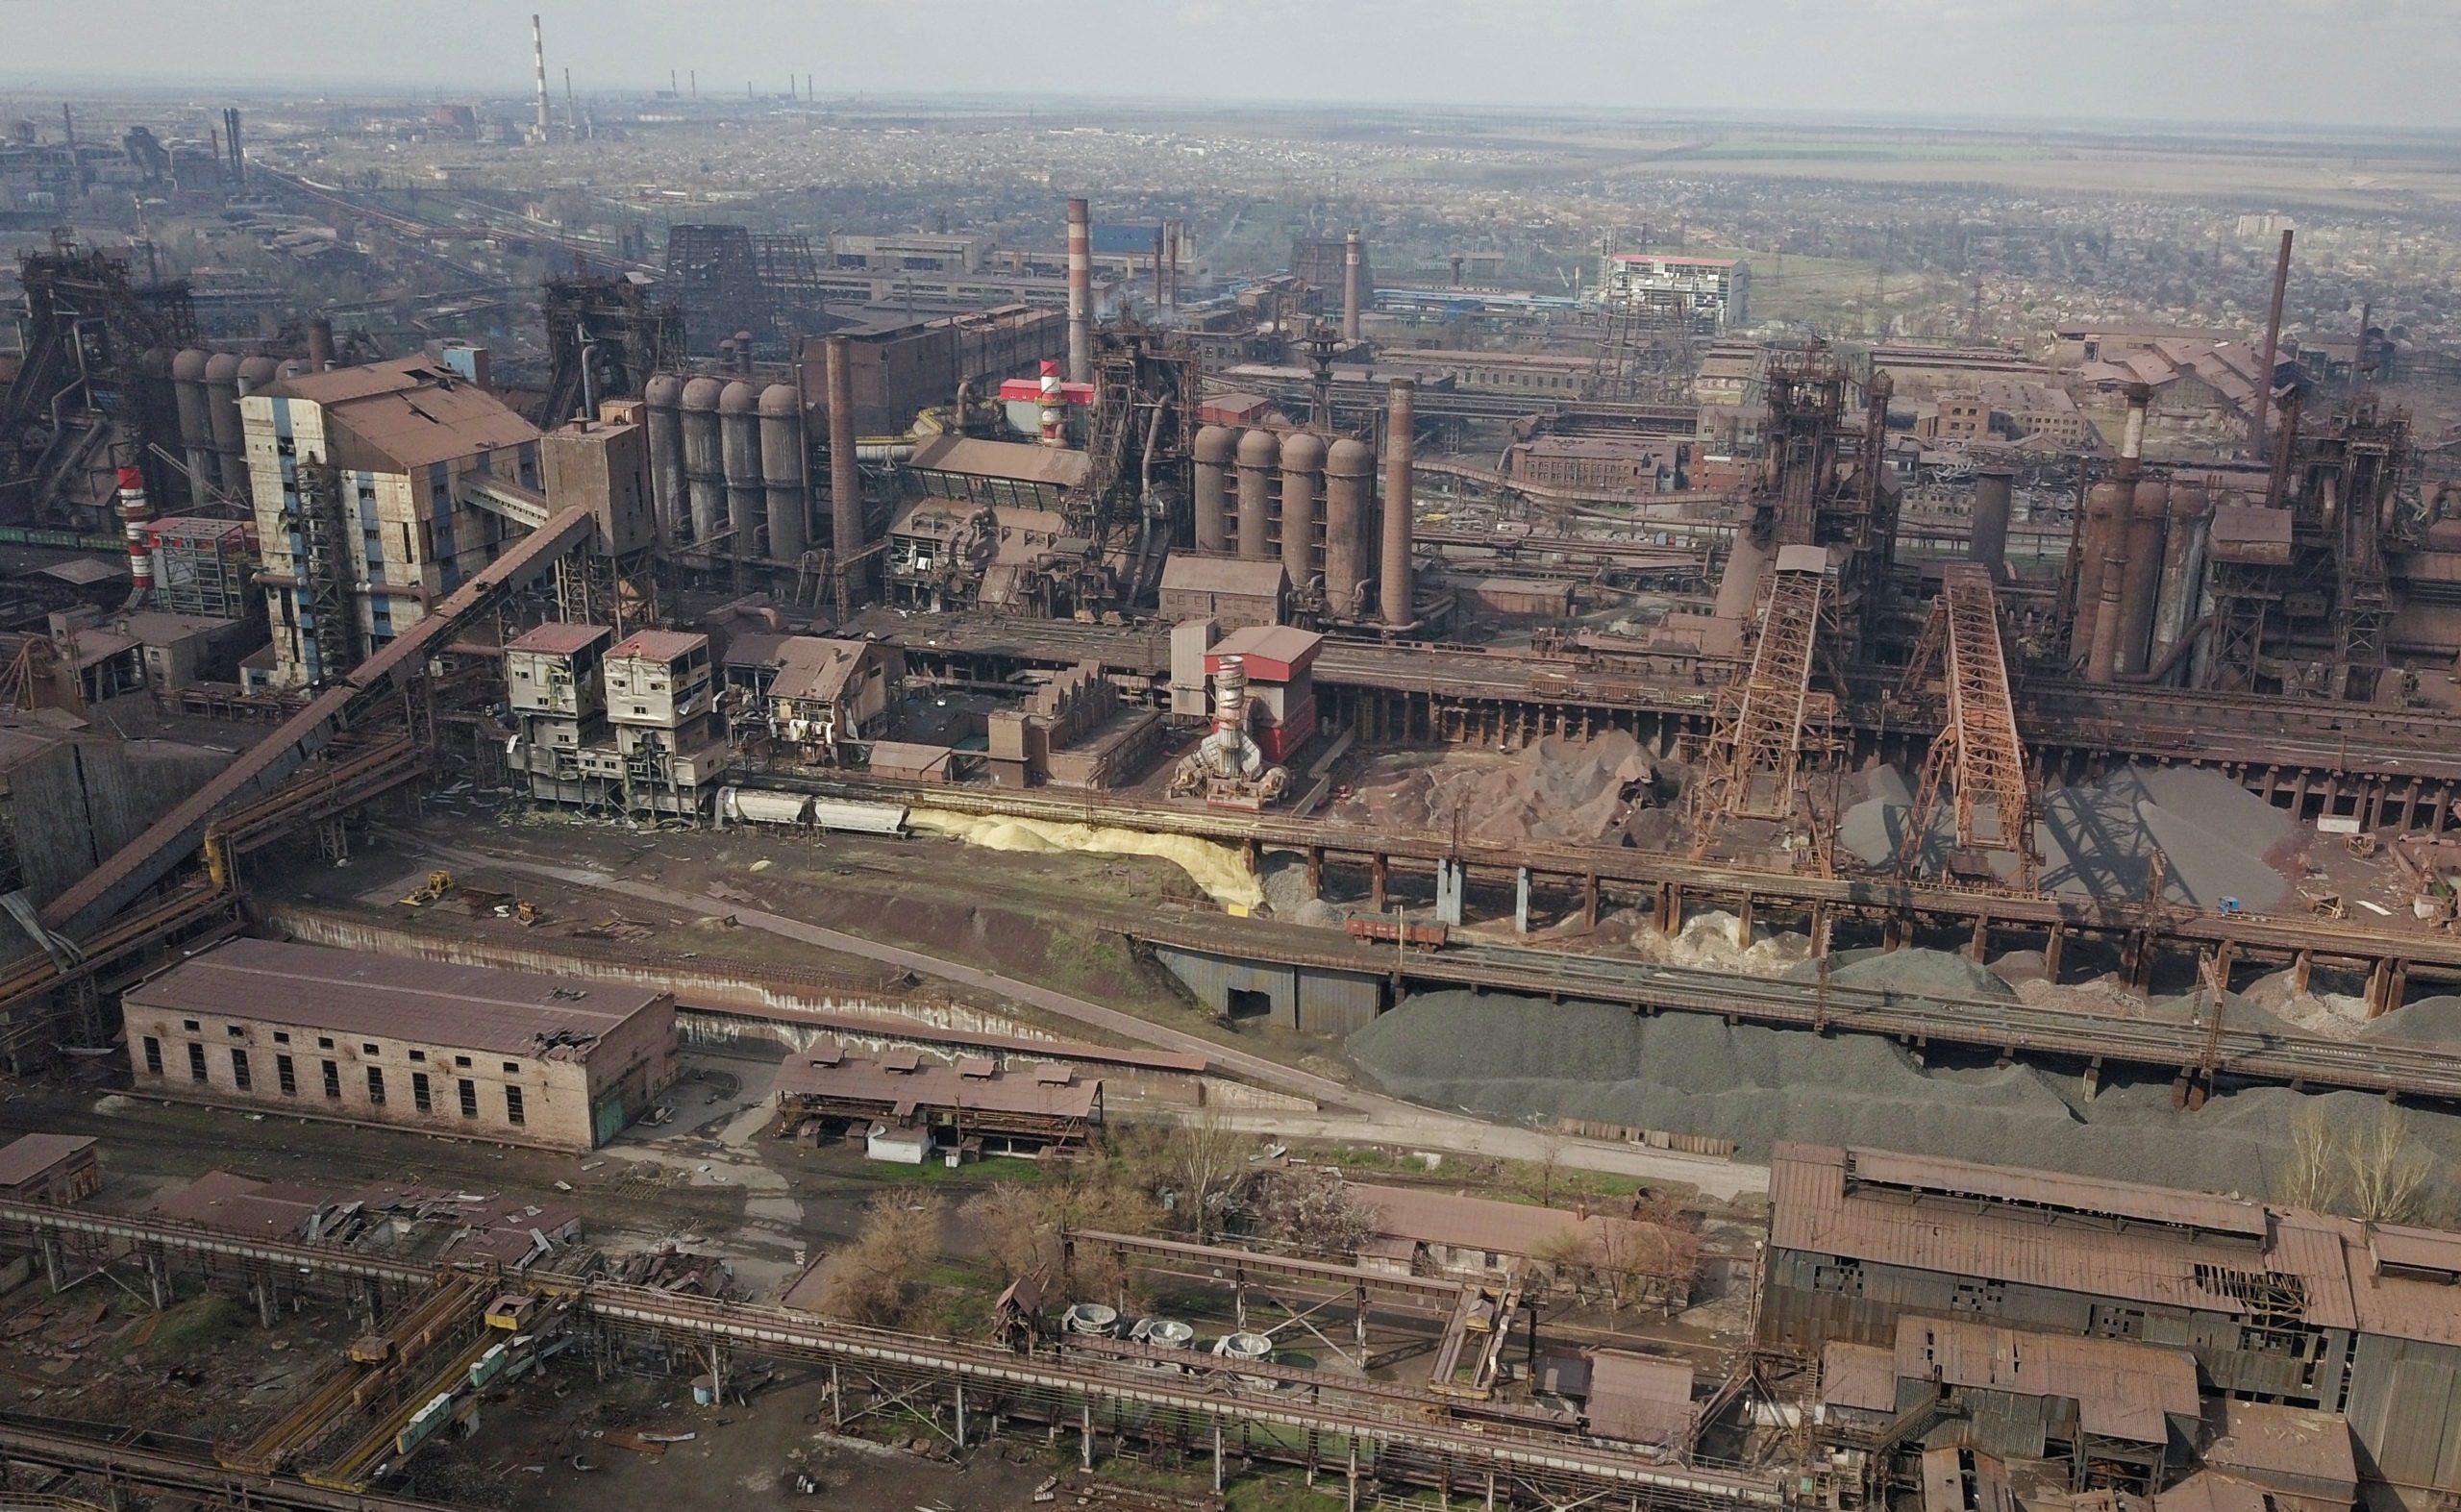 Illich Steel and Iron Works Mariupol